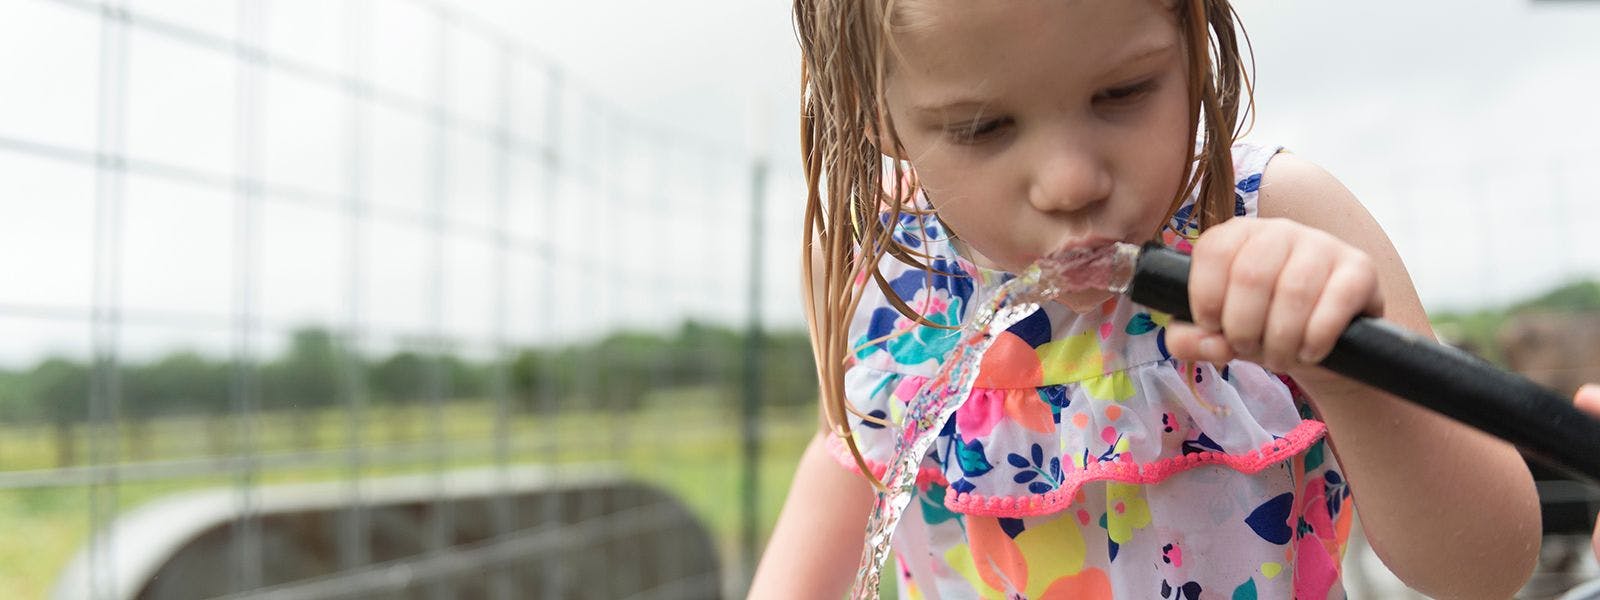 Young girl drinking water from a garden hose